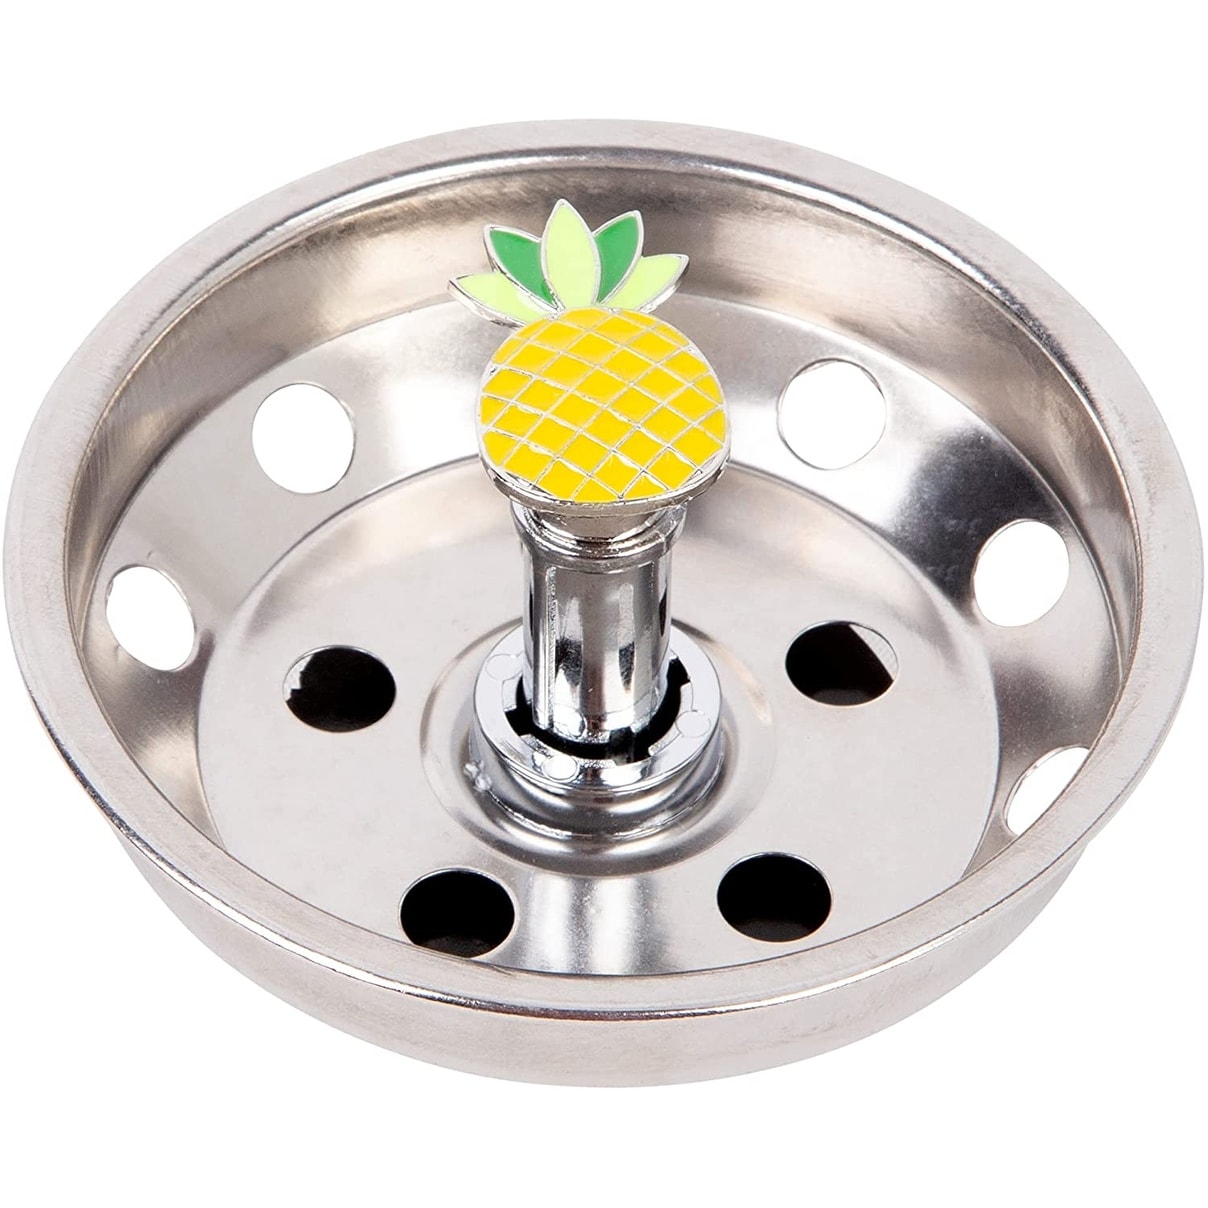 https://ak1.ostkcdn.com/images/products/is/images/direct/05e6ba1a216785ca2c5ad7cfe24151775b8d5b89/Kitchen-Sink-Strainer-for-Standard-Drains---Drain-Stopper-With-Fun-Finish.jpg